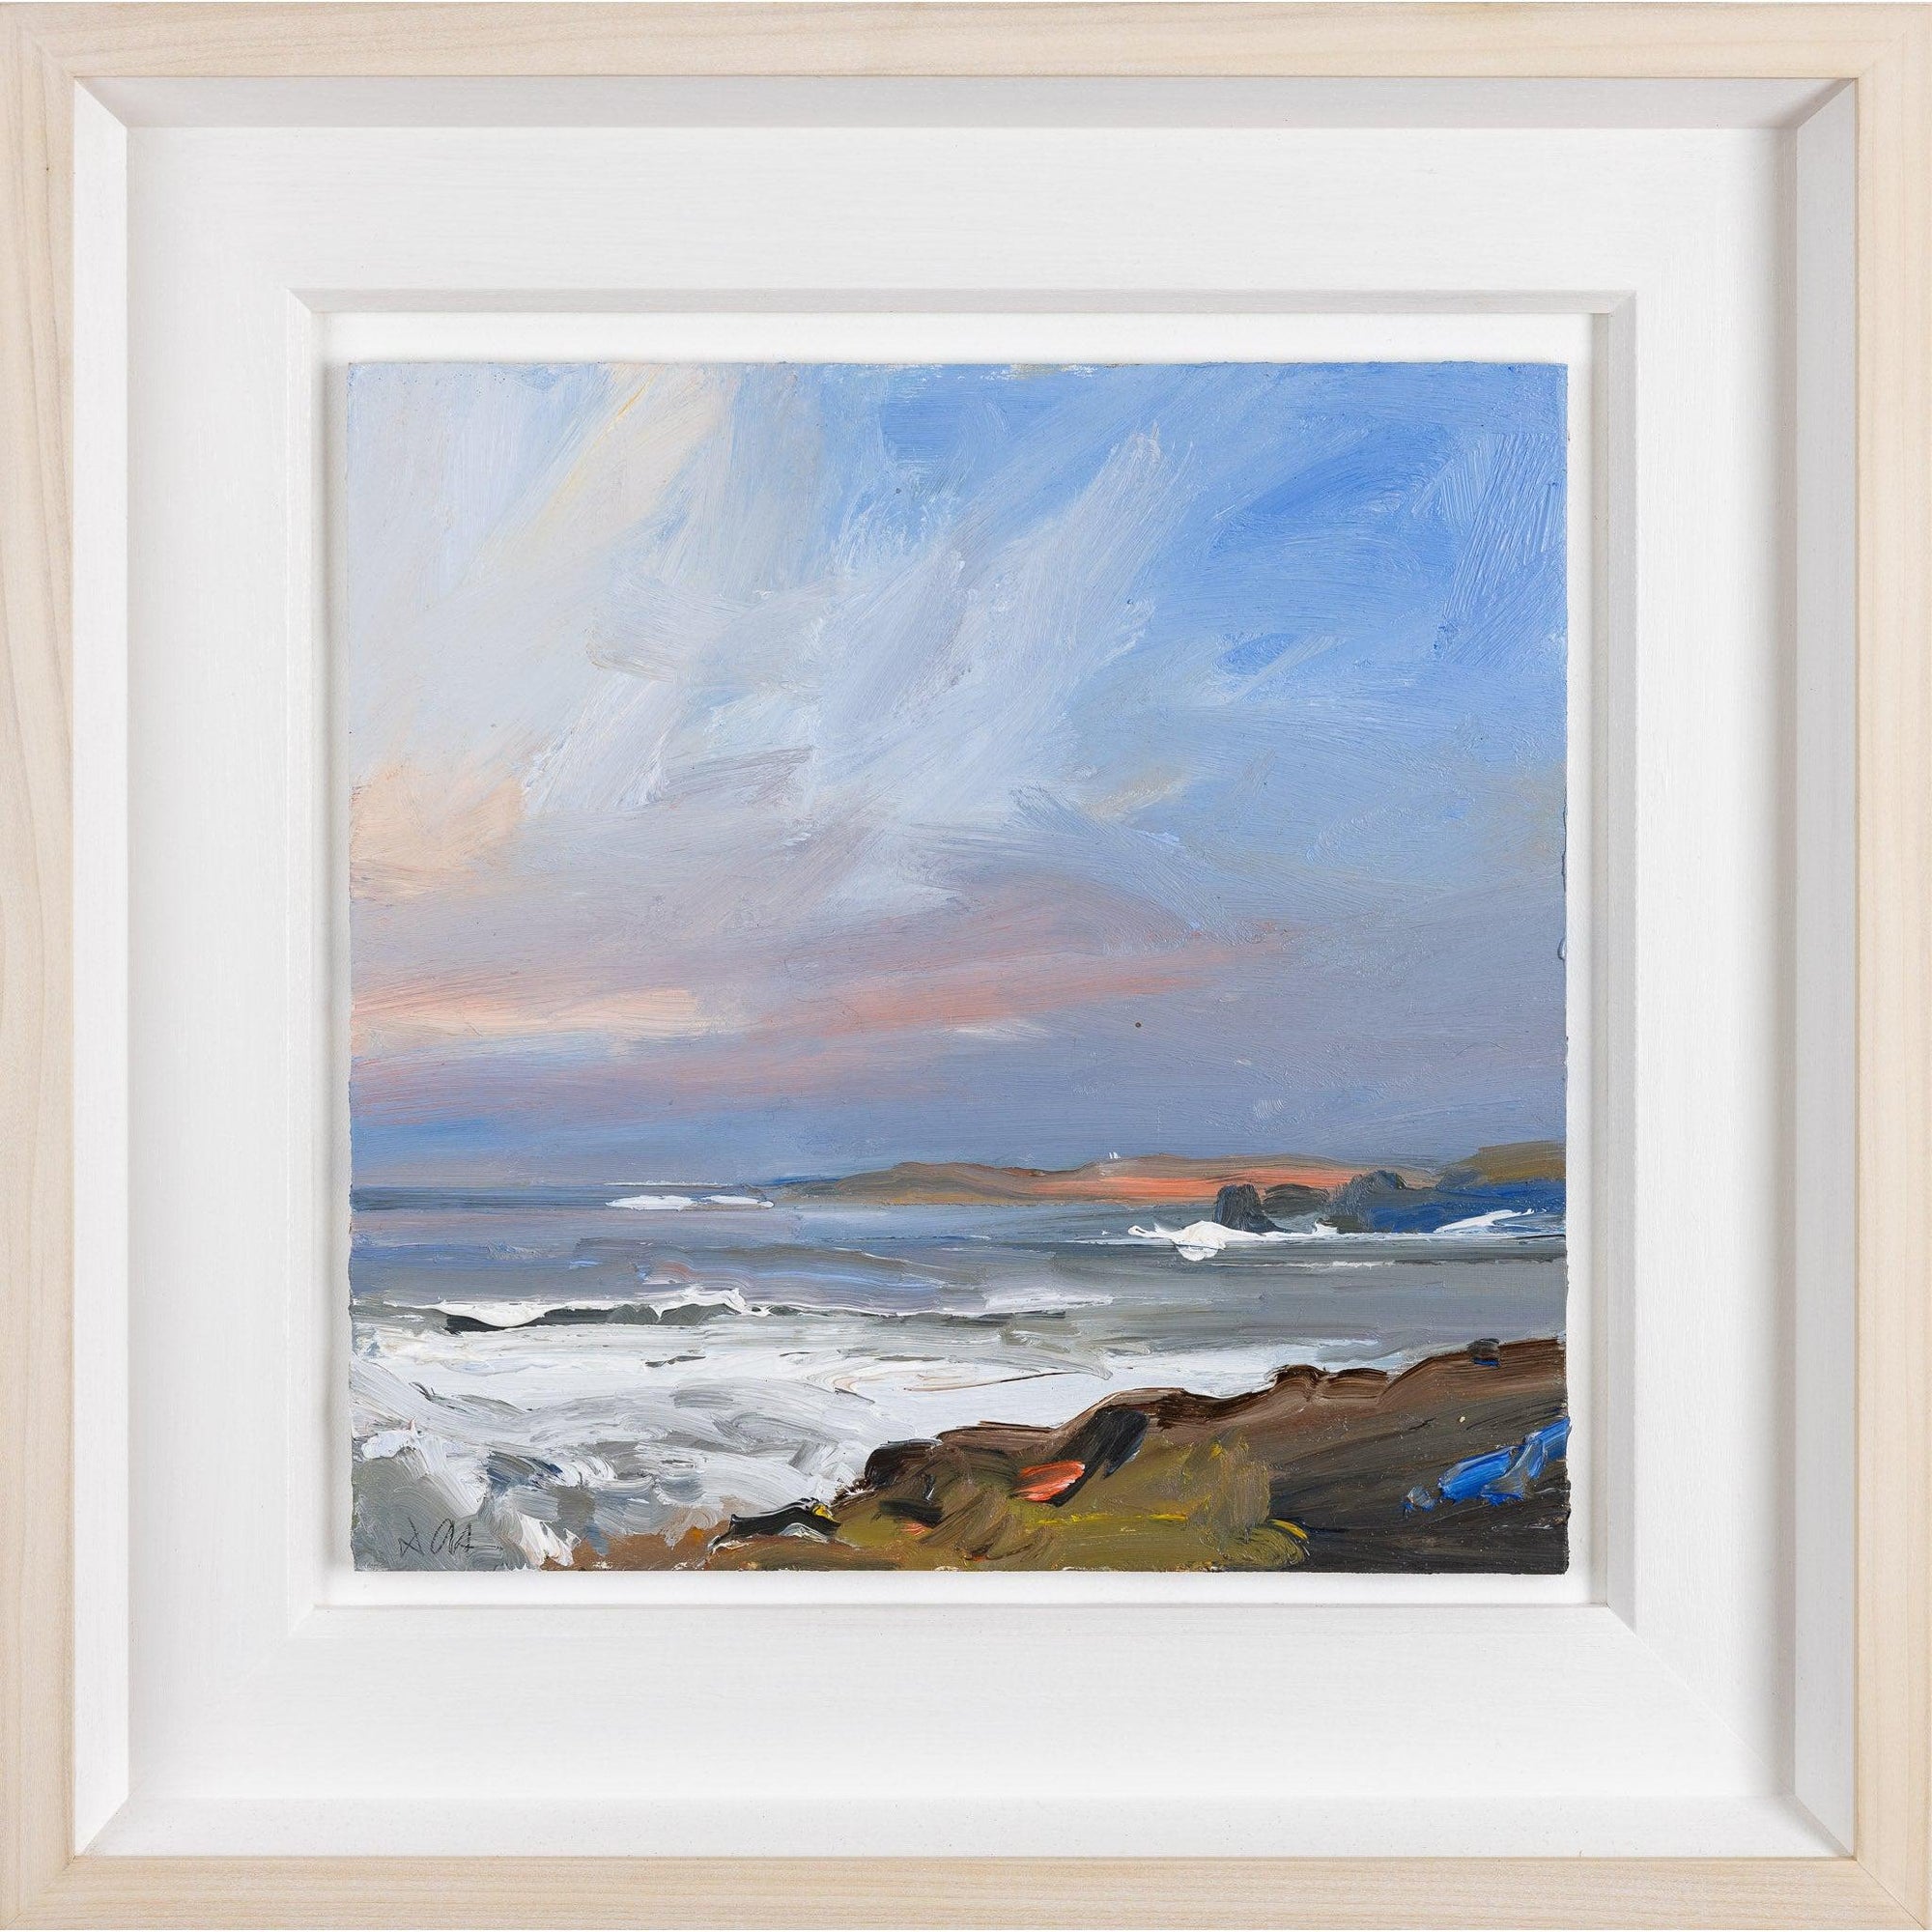 'High Tide, Porthcothan Beach' oil on board original by David Atkins, available at Padstow Gallery, Cornwall